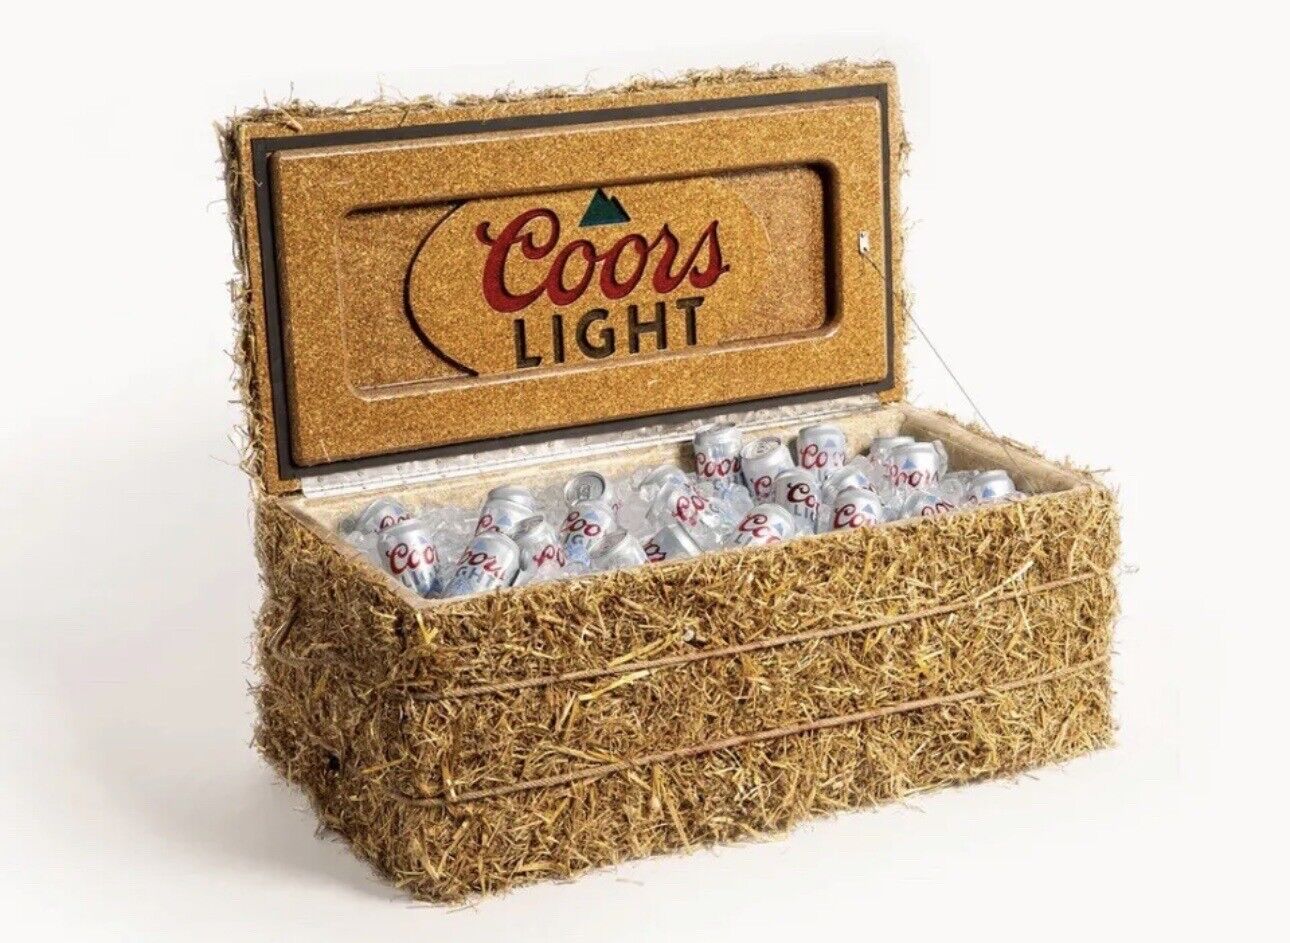 Coors Light Beer Bale Beverage Drink Cooler Limited Edition 30 [IN HAND]